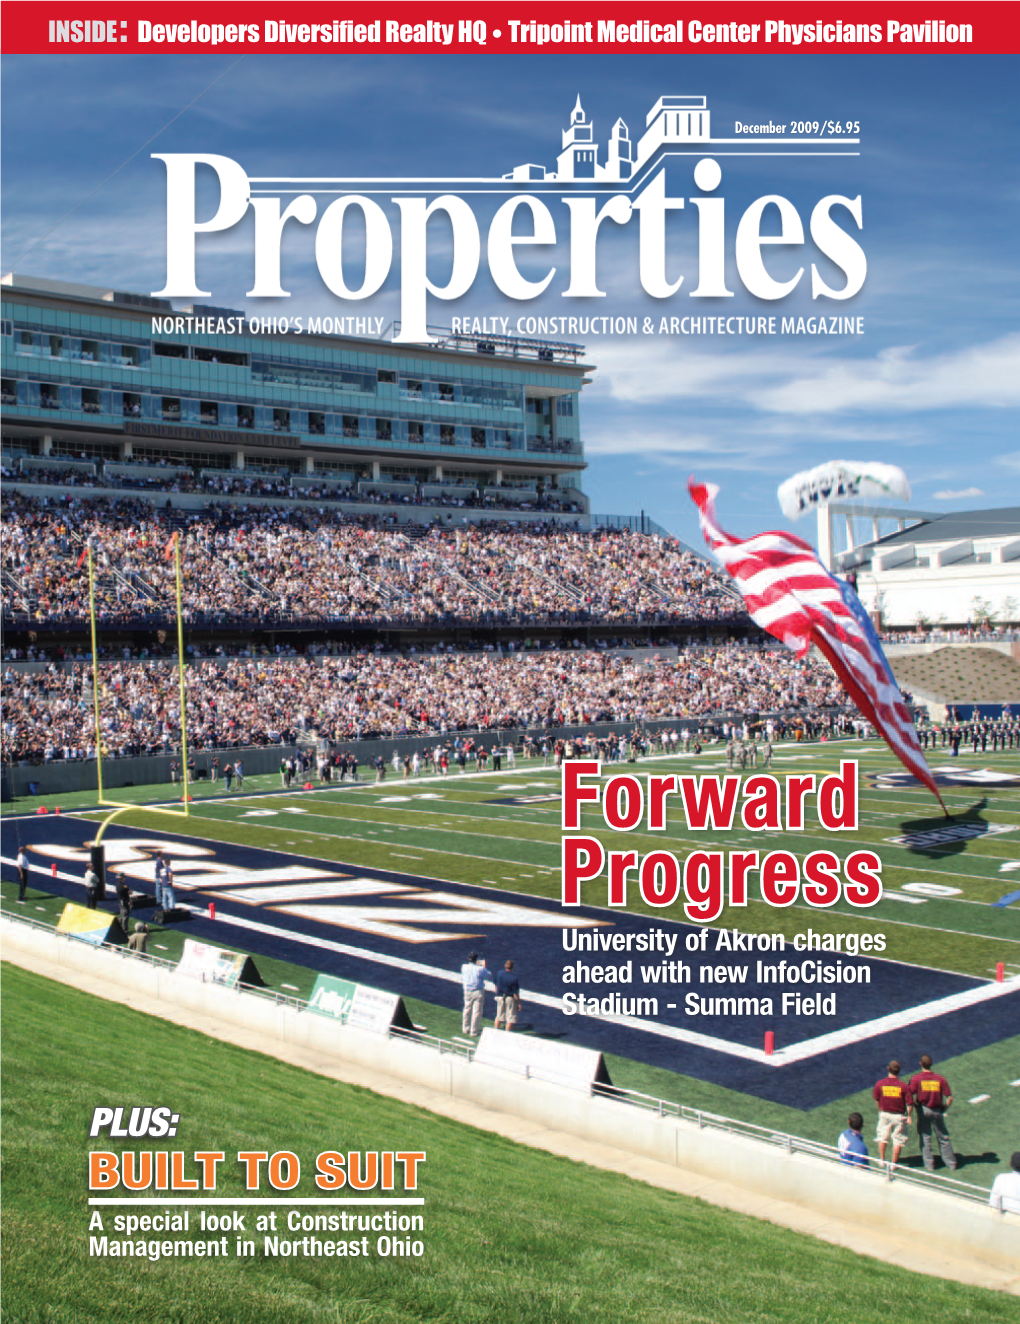 Forward Progress University of Akron Charges Ahead with New Infocision Stadium - Summa Field